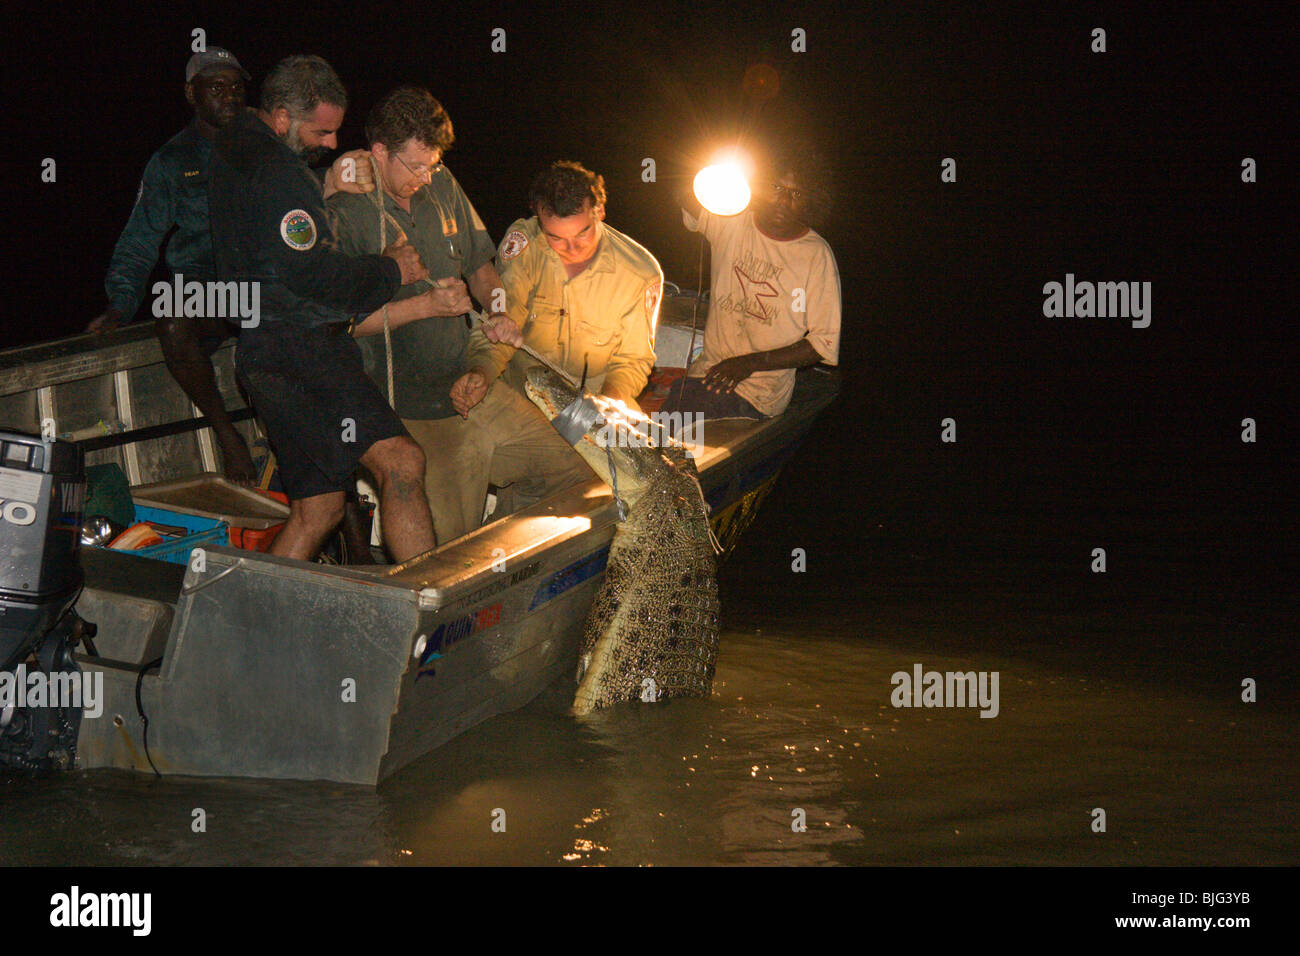 BAC Aborigianal Rangers assist in catching crocodile from a river in ArnhemLand at night to relocate for scientific research. Stock Photo